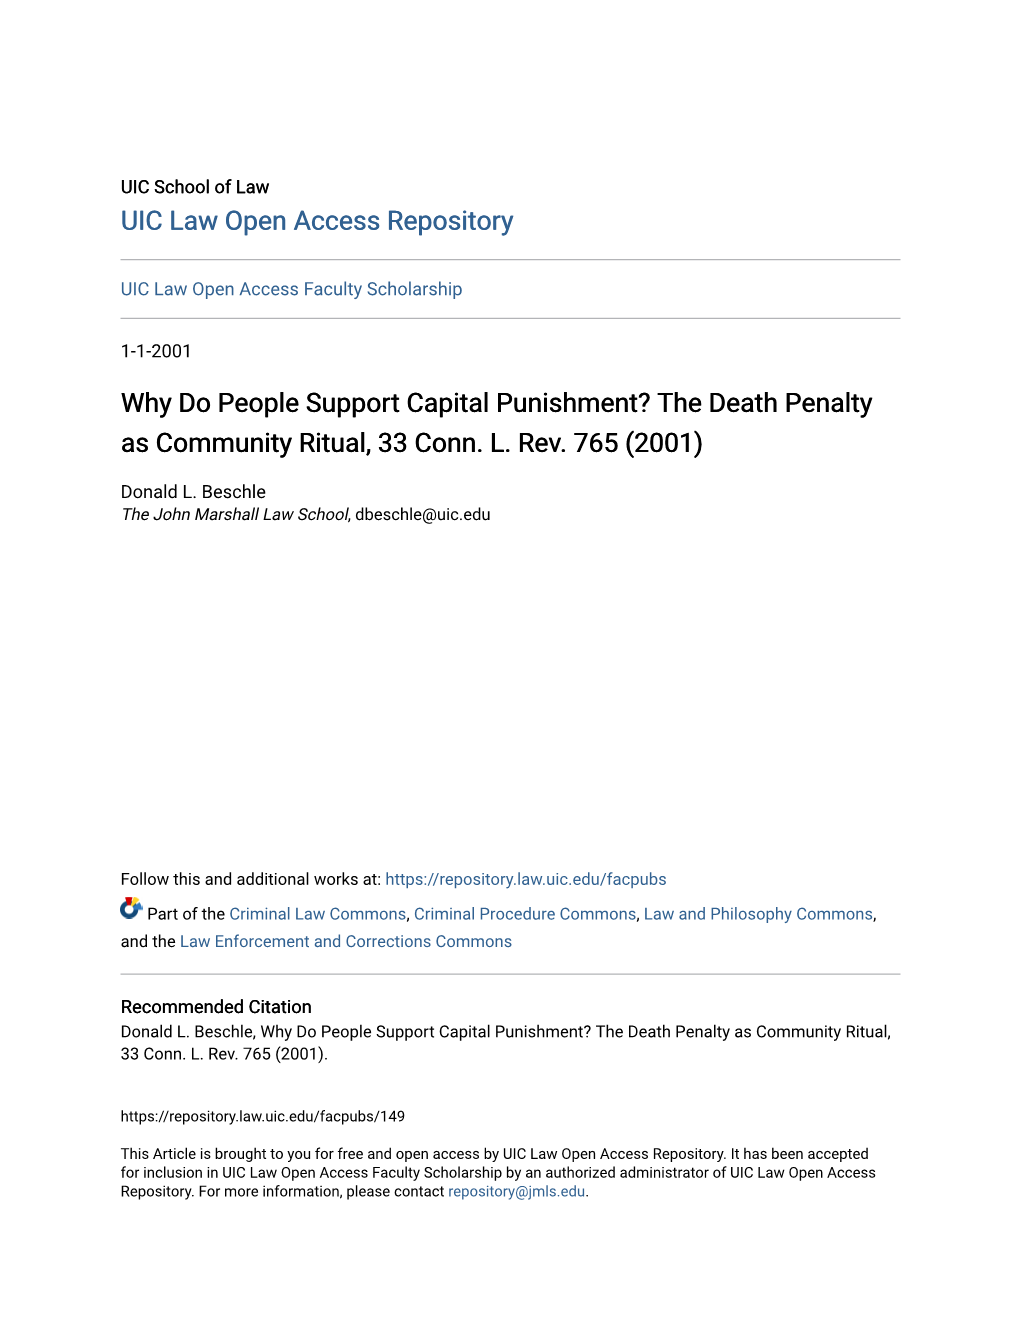 Why Do People Support Capital Punishment? the Death Penalty As Community Ritual, 33 Conn